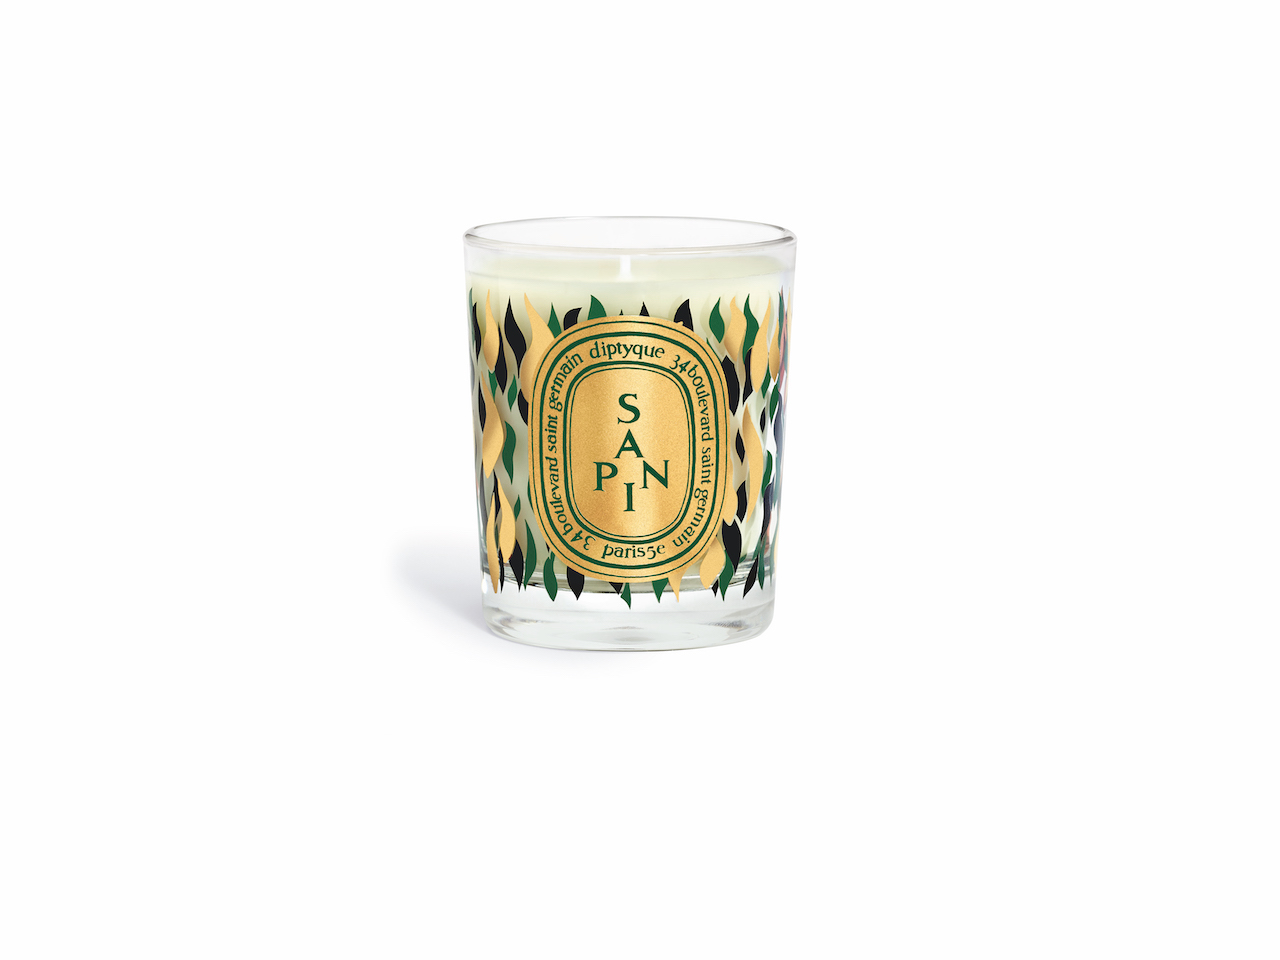 A Diptyque Sapin candle that is on sale as part of the best Black Friday Deals.